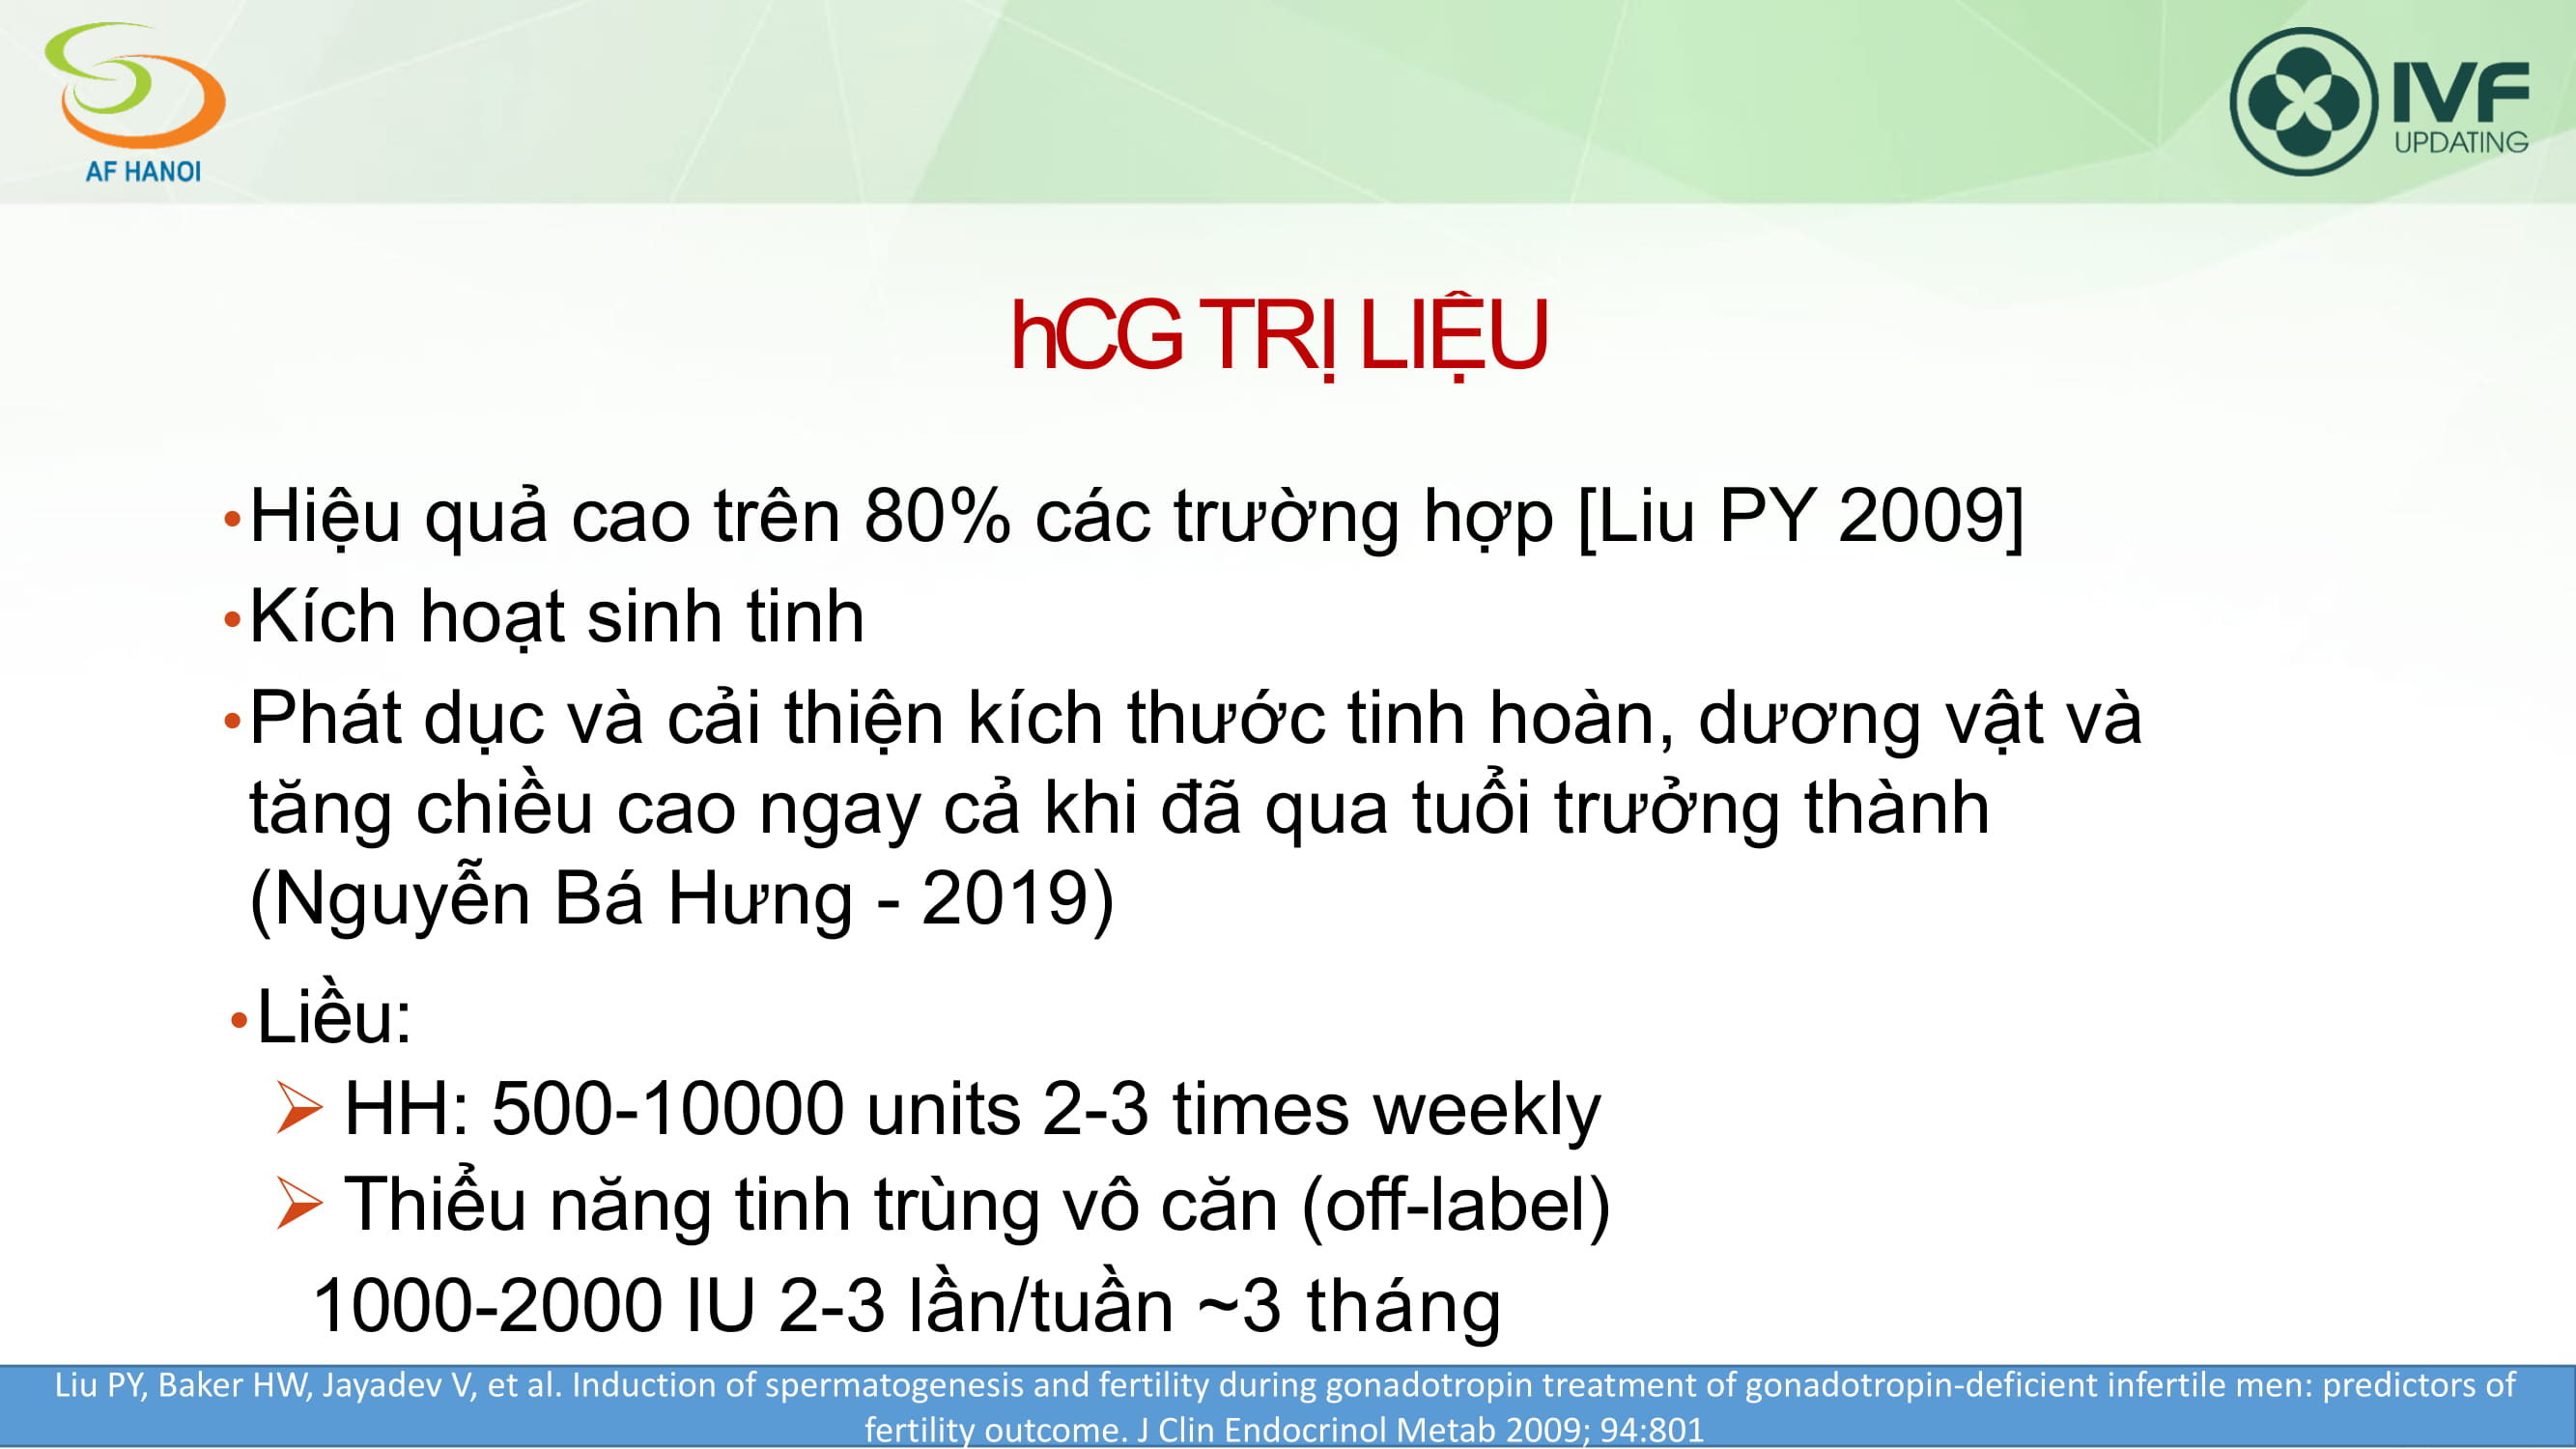 BS Nguyen Ba Hung - Chi dinh thuoc kich thich sinh tinh1-25